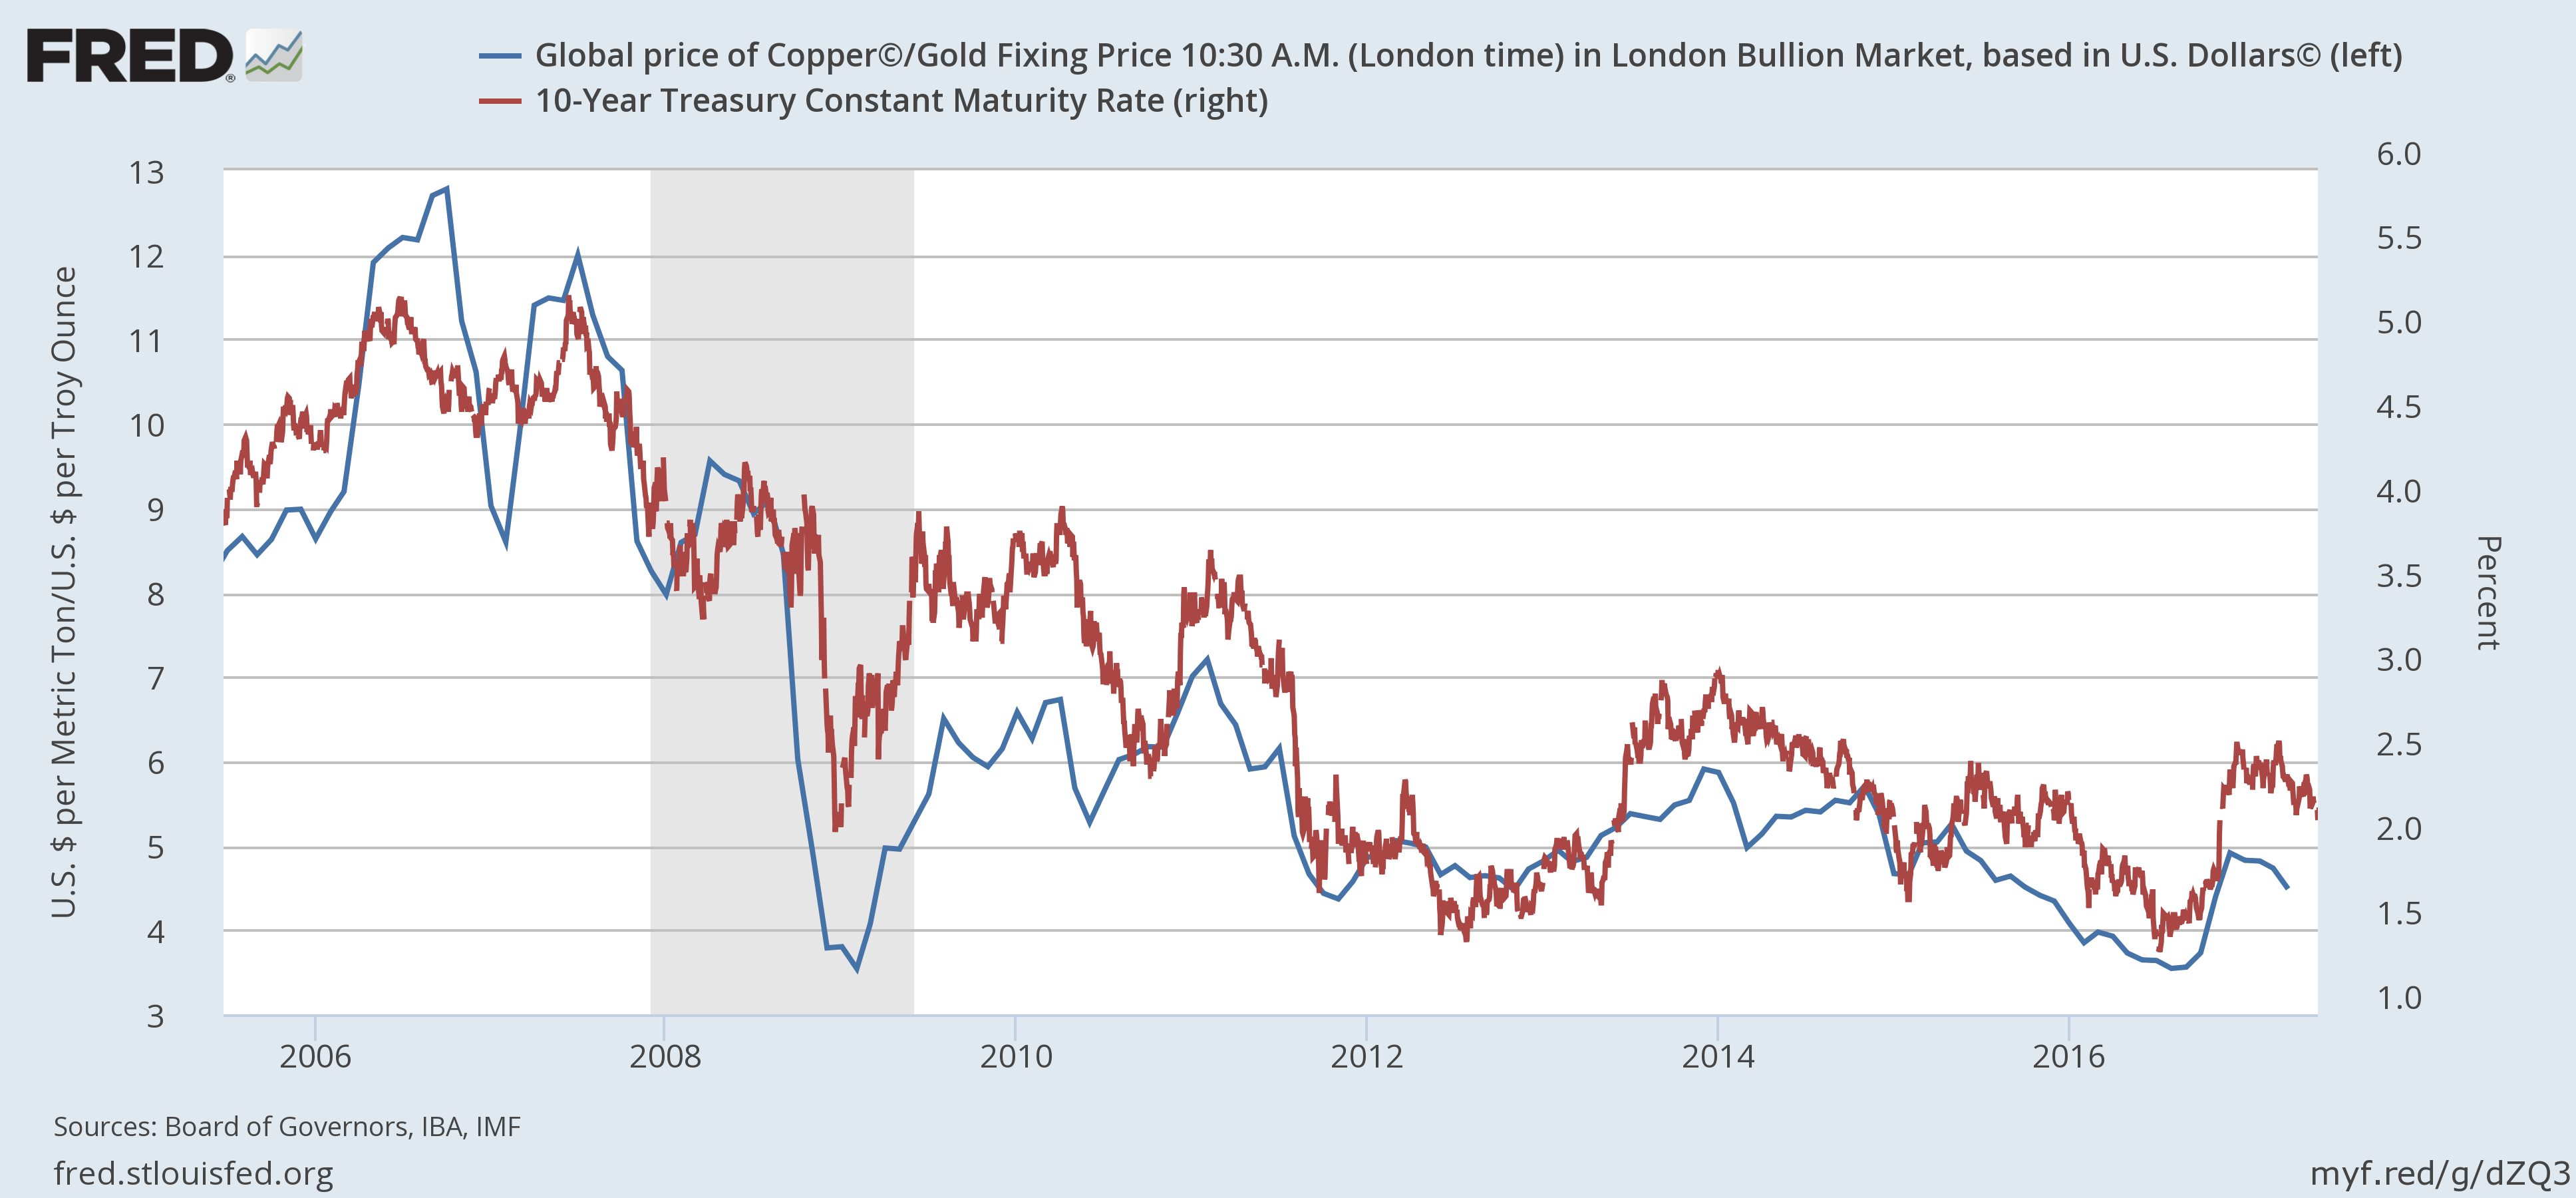 Copper/Gold Fixing Price